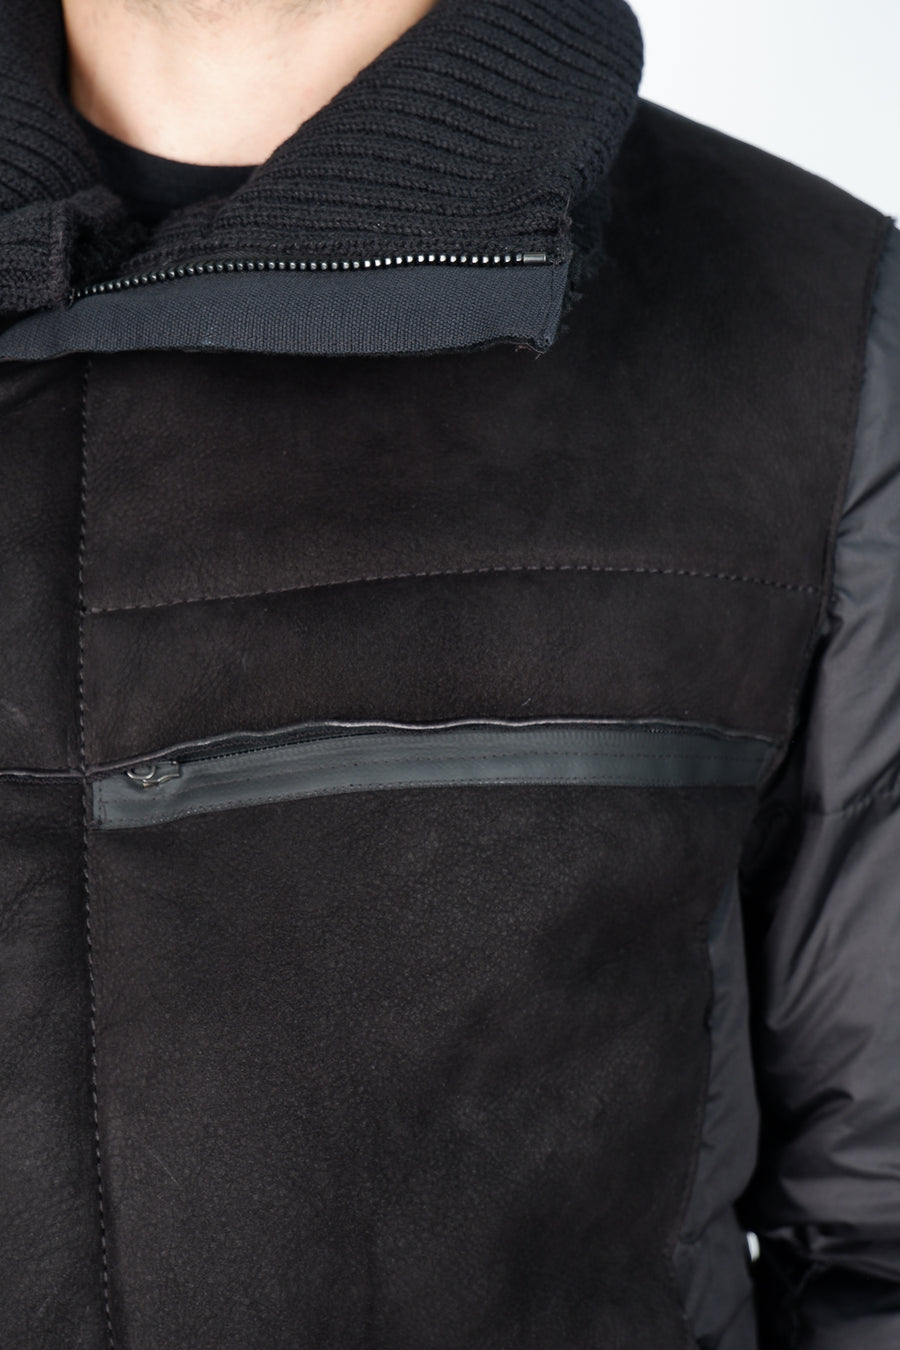 Buy the Transit Leather/Down Padded Jacket Black at Intro. Spend £50 for free UK delivery. Official stockists. We ship worldwide.